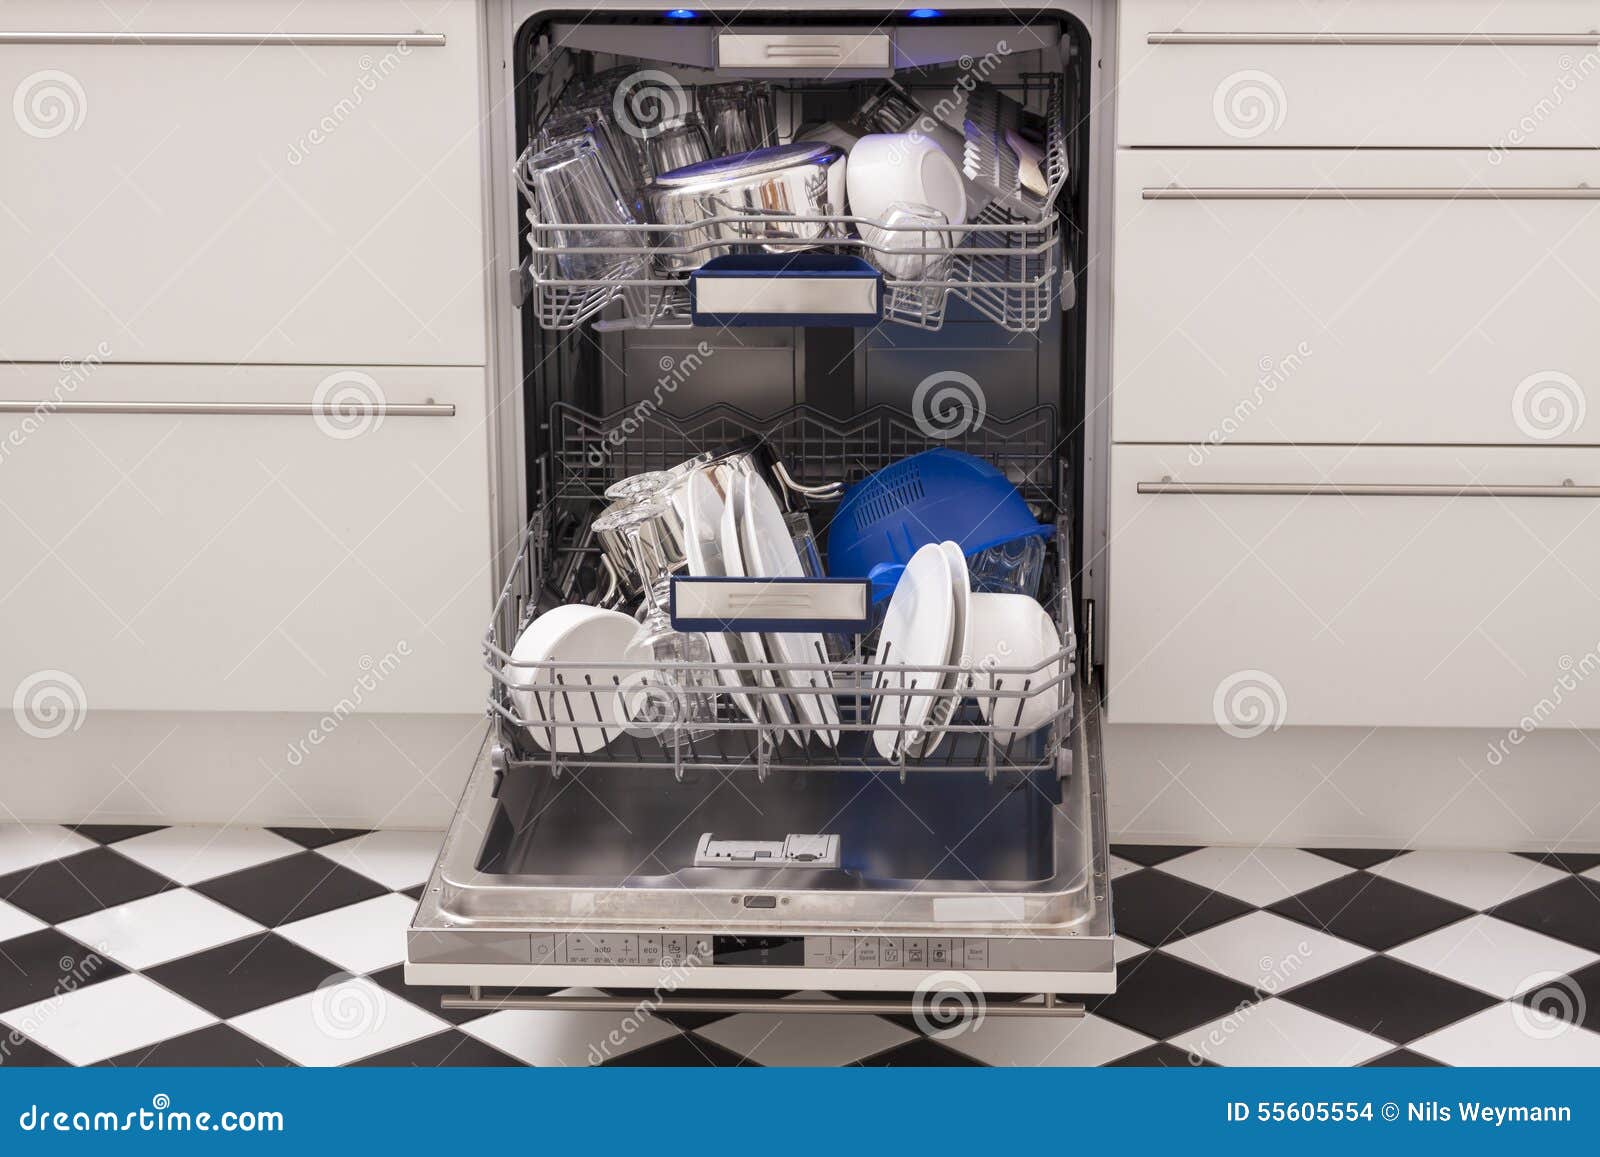 dishwasher loads in a kitchen with clean dishes